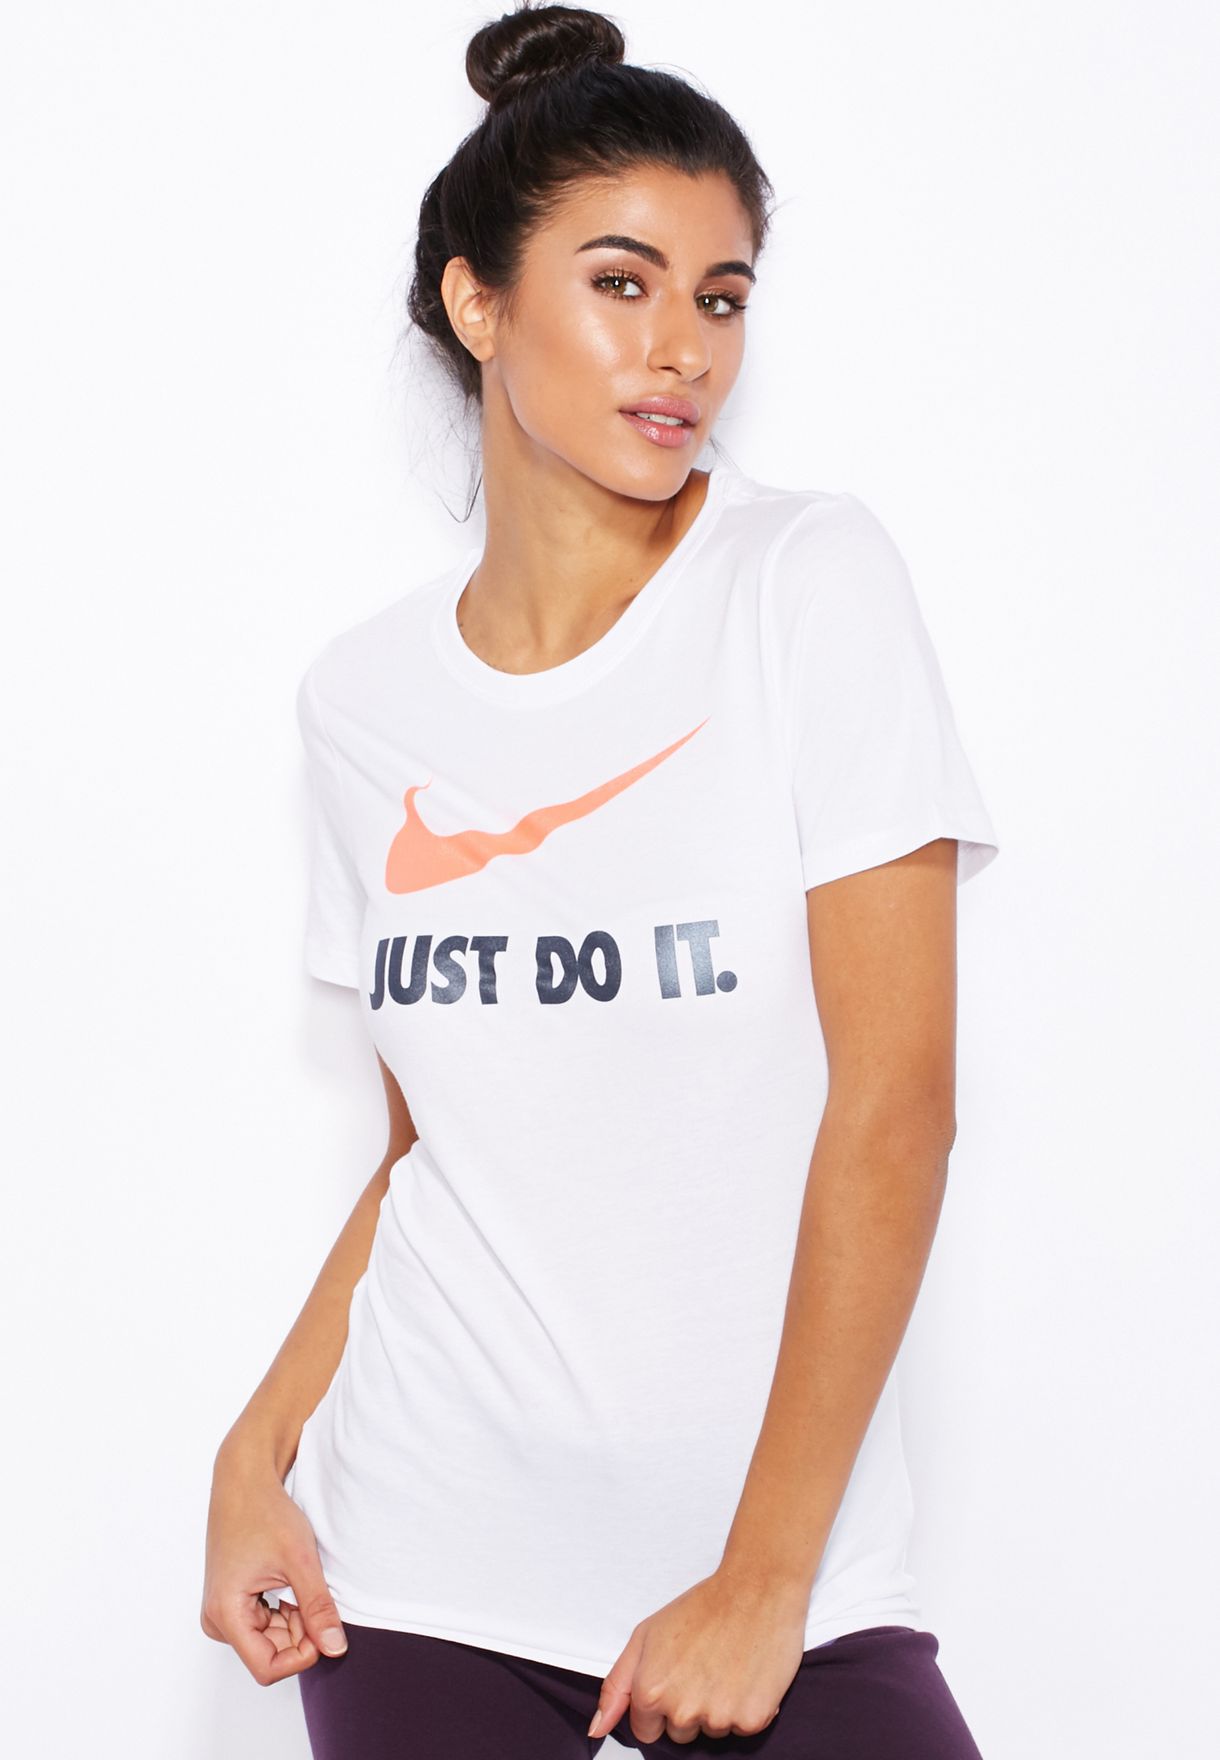 nike just do it woman